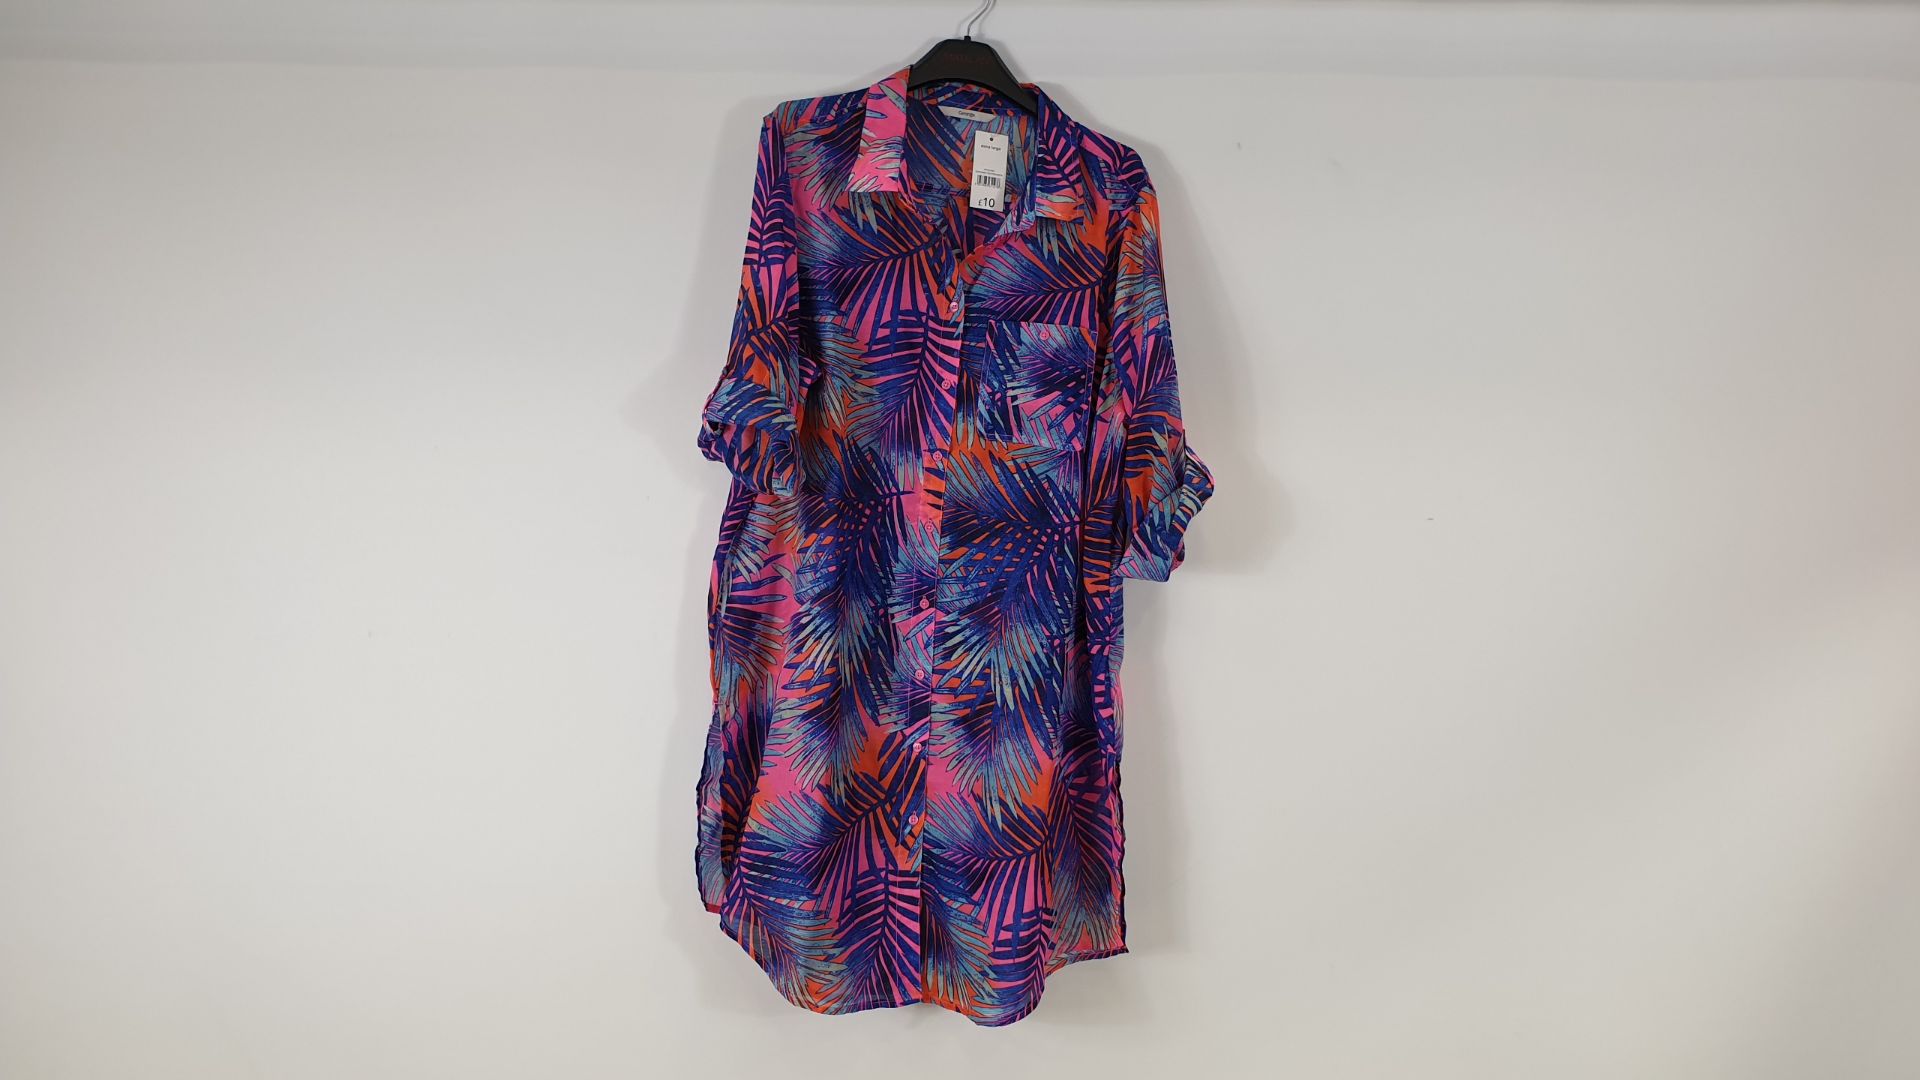 100 X BRAND NEW MULTI COLOURED BEACH SHIRTS BY GEORGE - SIZE XL - (28911) RRP £10 EACH - IN 1